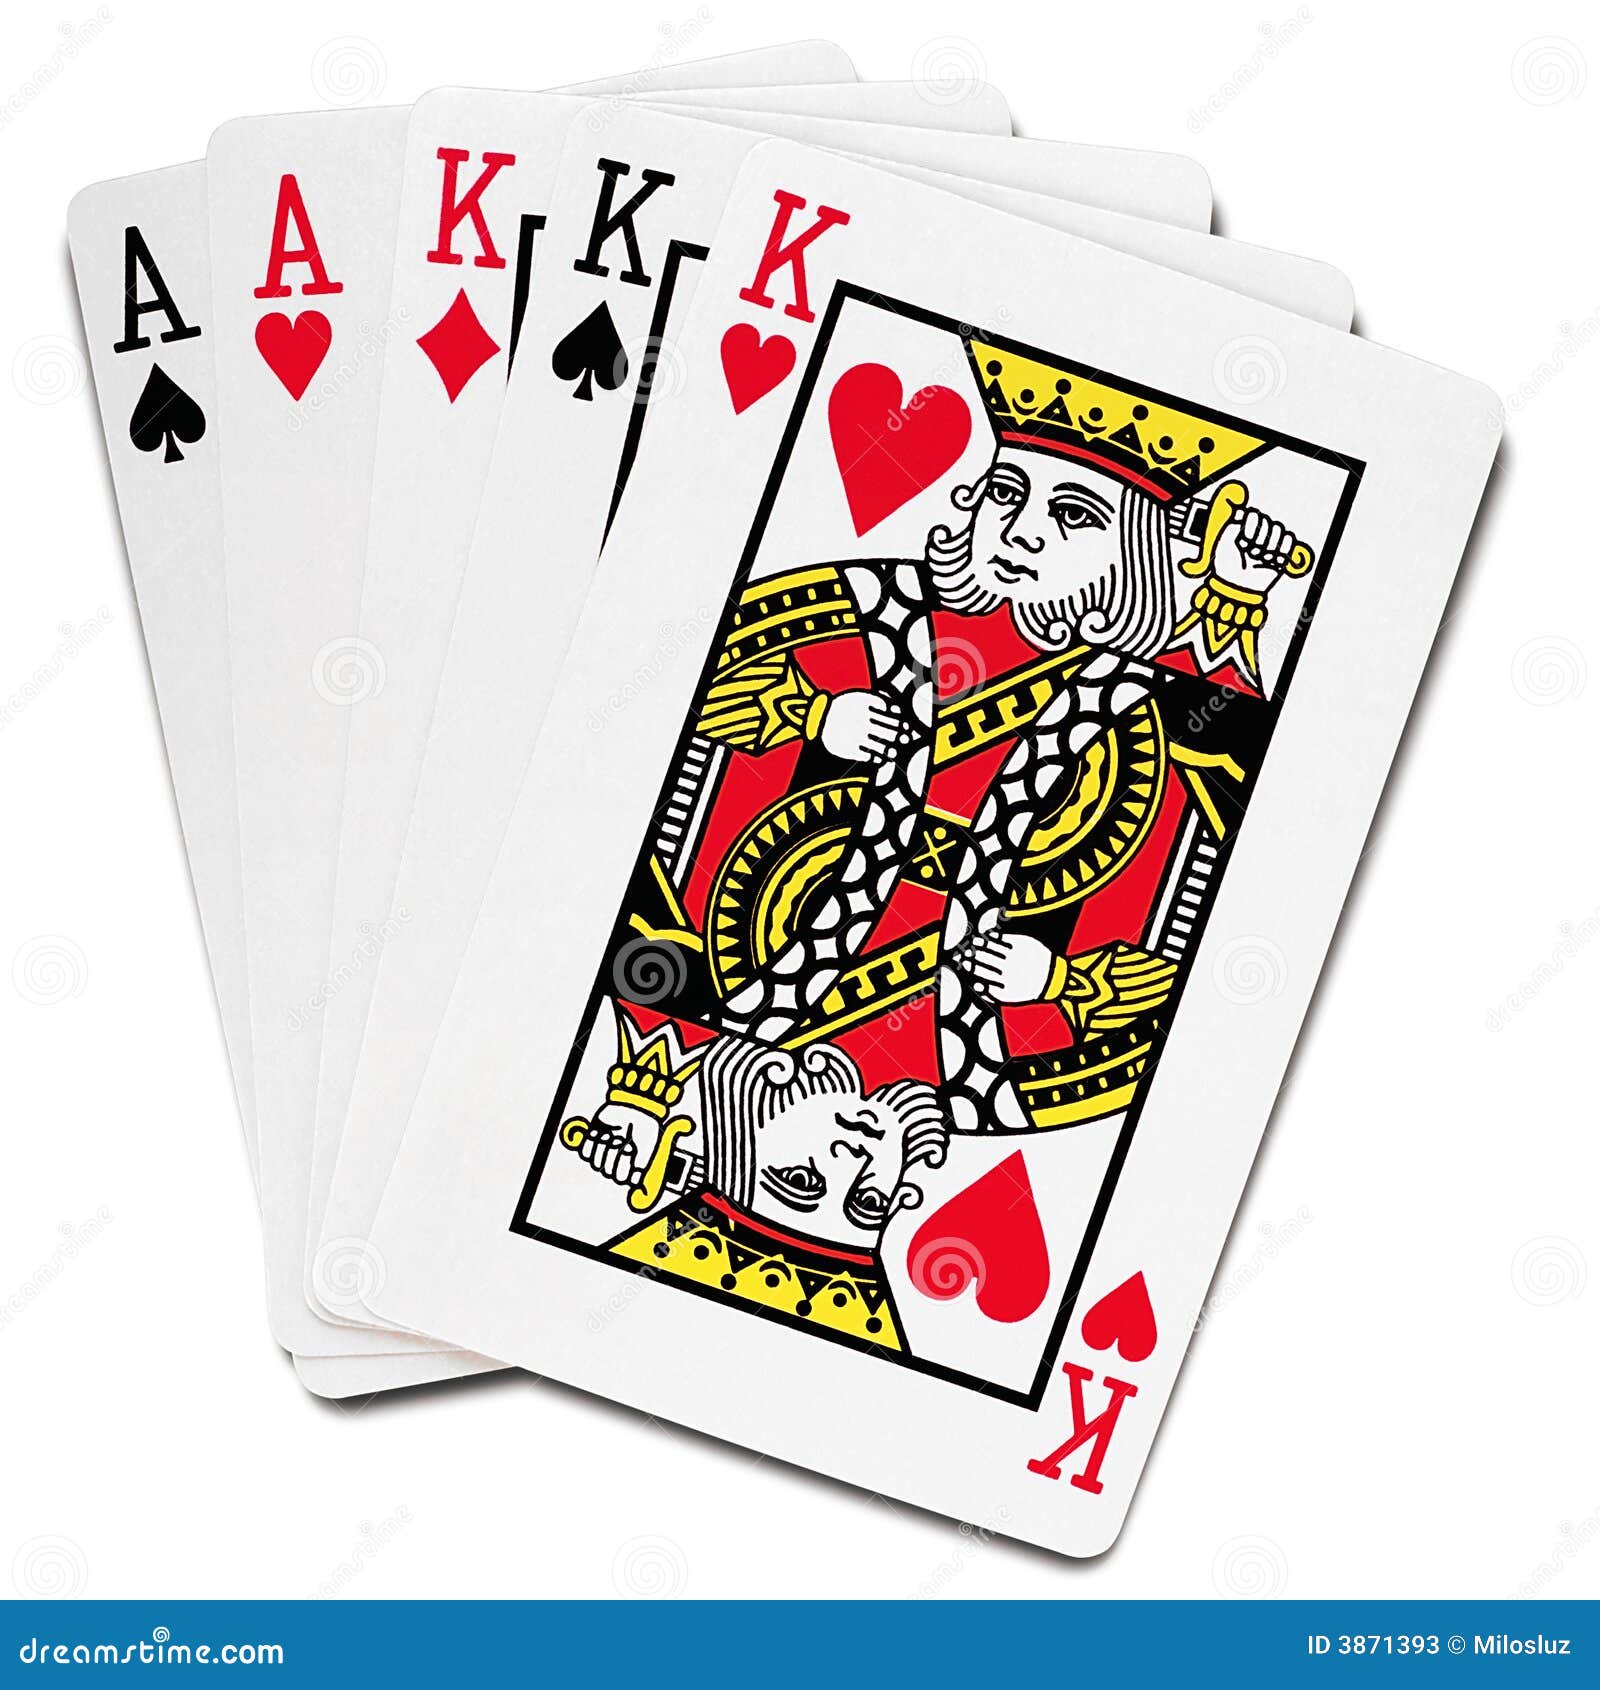 Cards stock image. Image of house, poker, isolated, gambling - 3871393